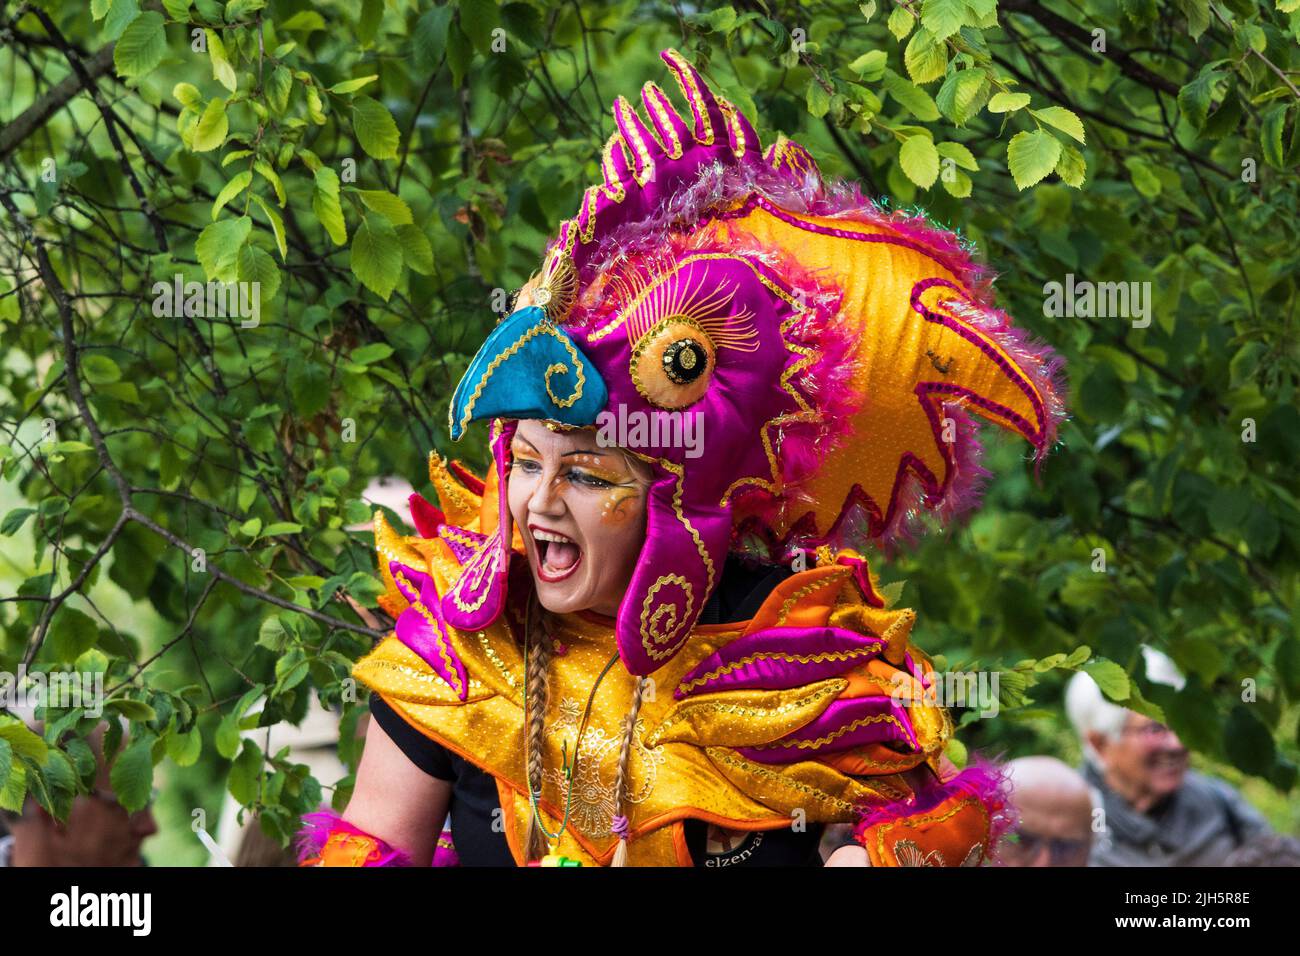 Bremen carnival with colourful costumes, masks and samba rhythms, Bremen, Germany, Europe Stock Photo